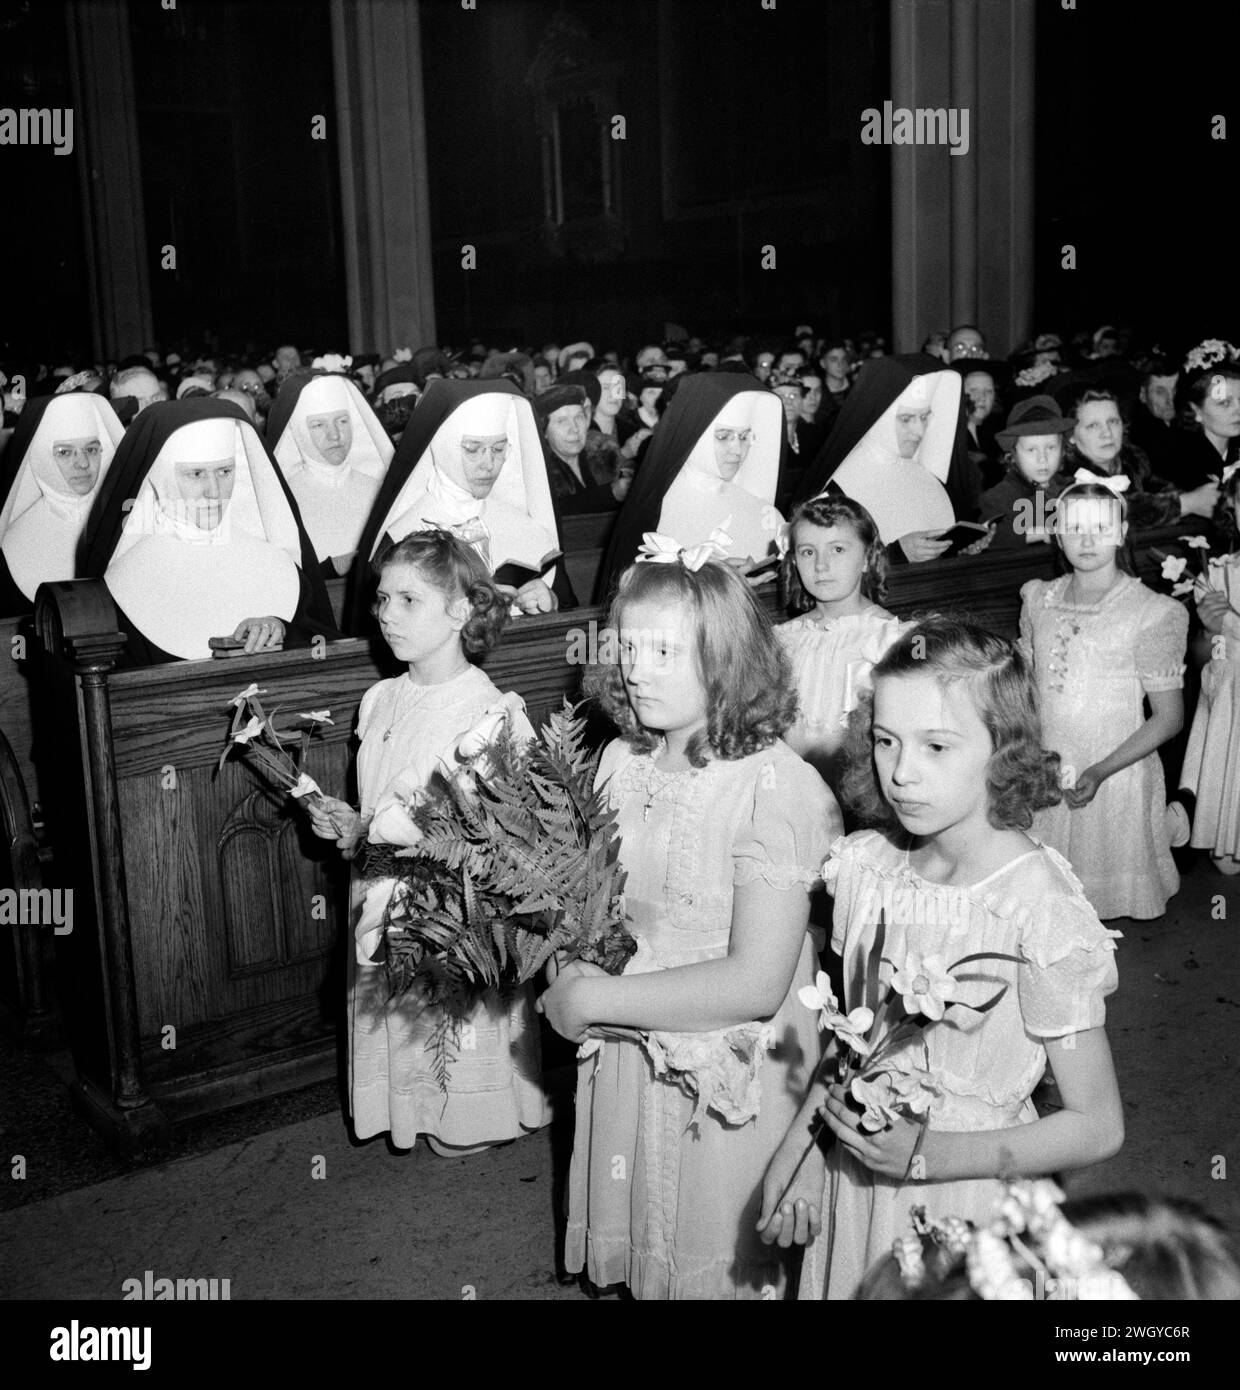 Procession and high mass at Corpus Christi church in Polish community, Buffalo, New York, USA, Marjory Collins, U.S. Office of War Information, April 1943 Stock Photo